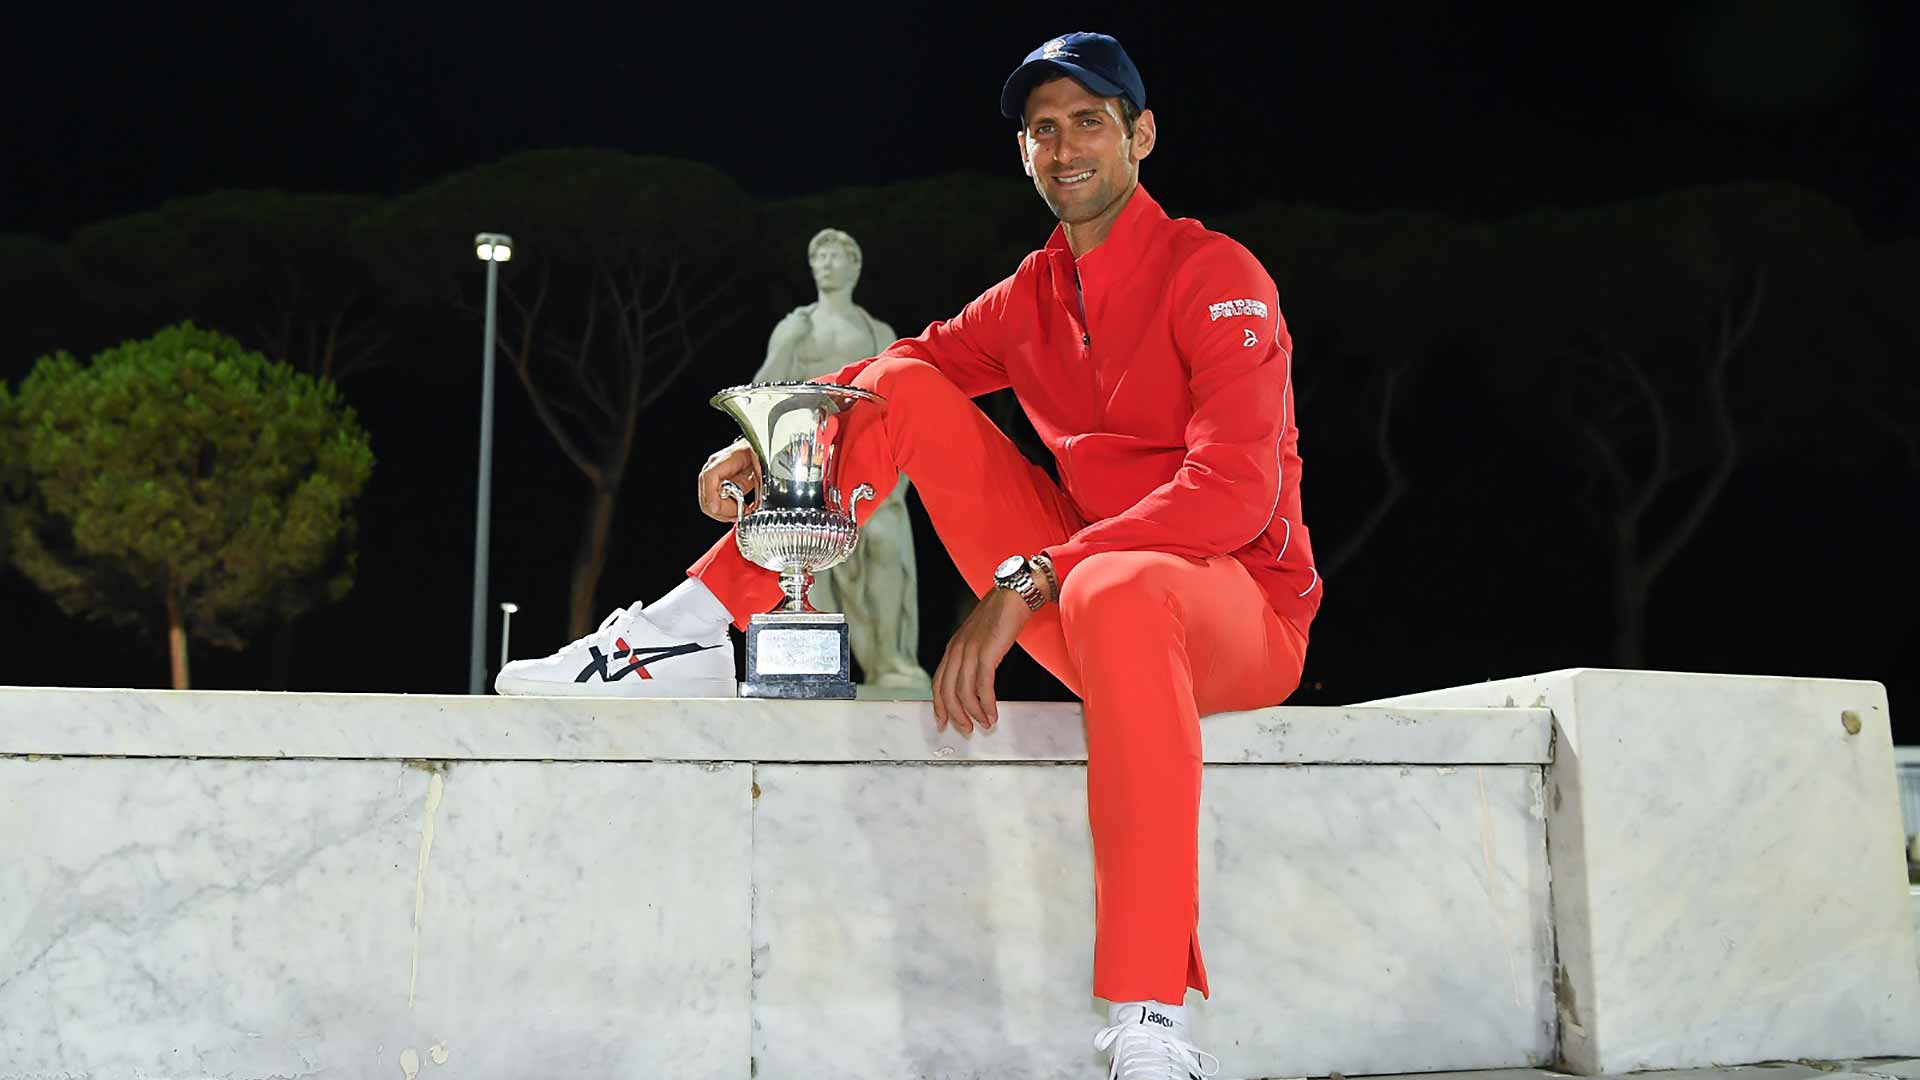 Novak Djokovic celebrates his fifth title in Rome and 36th ATP Masters 1000 crown.